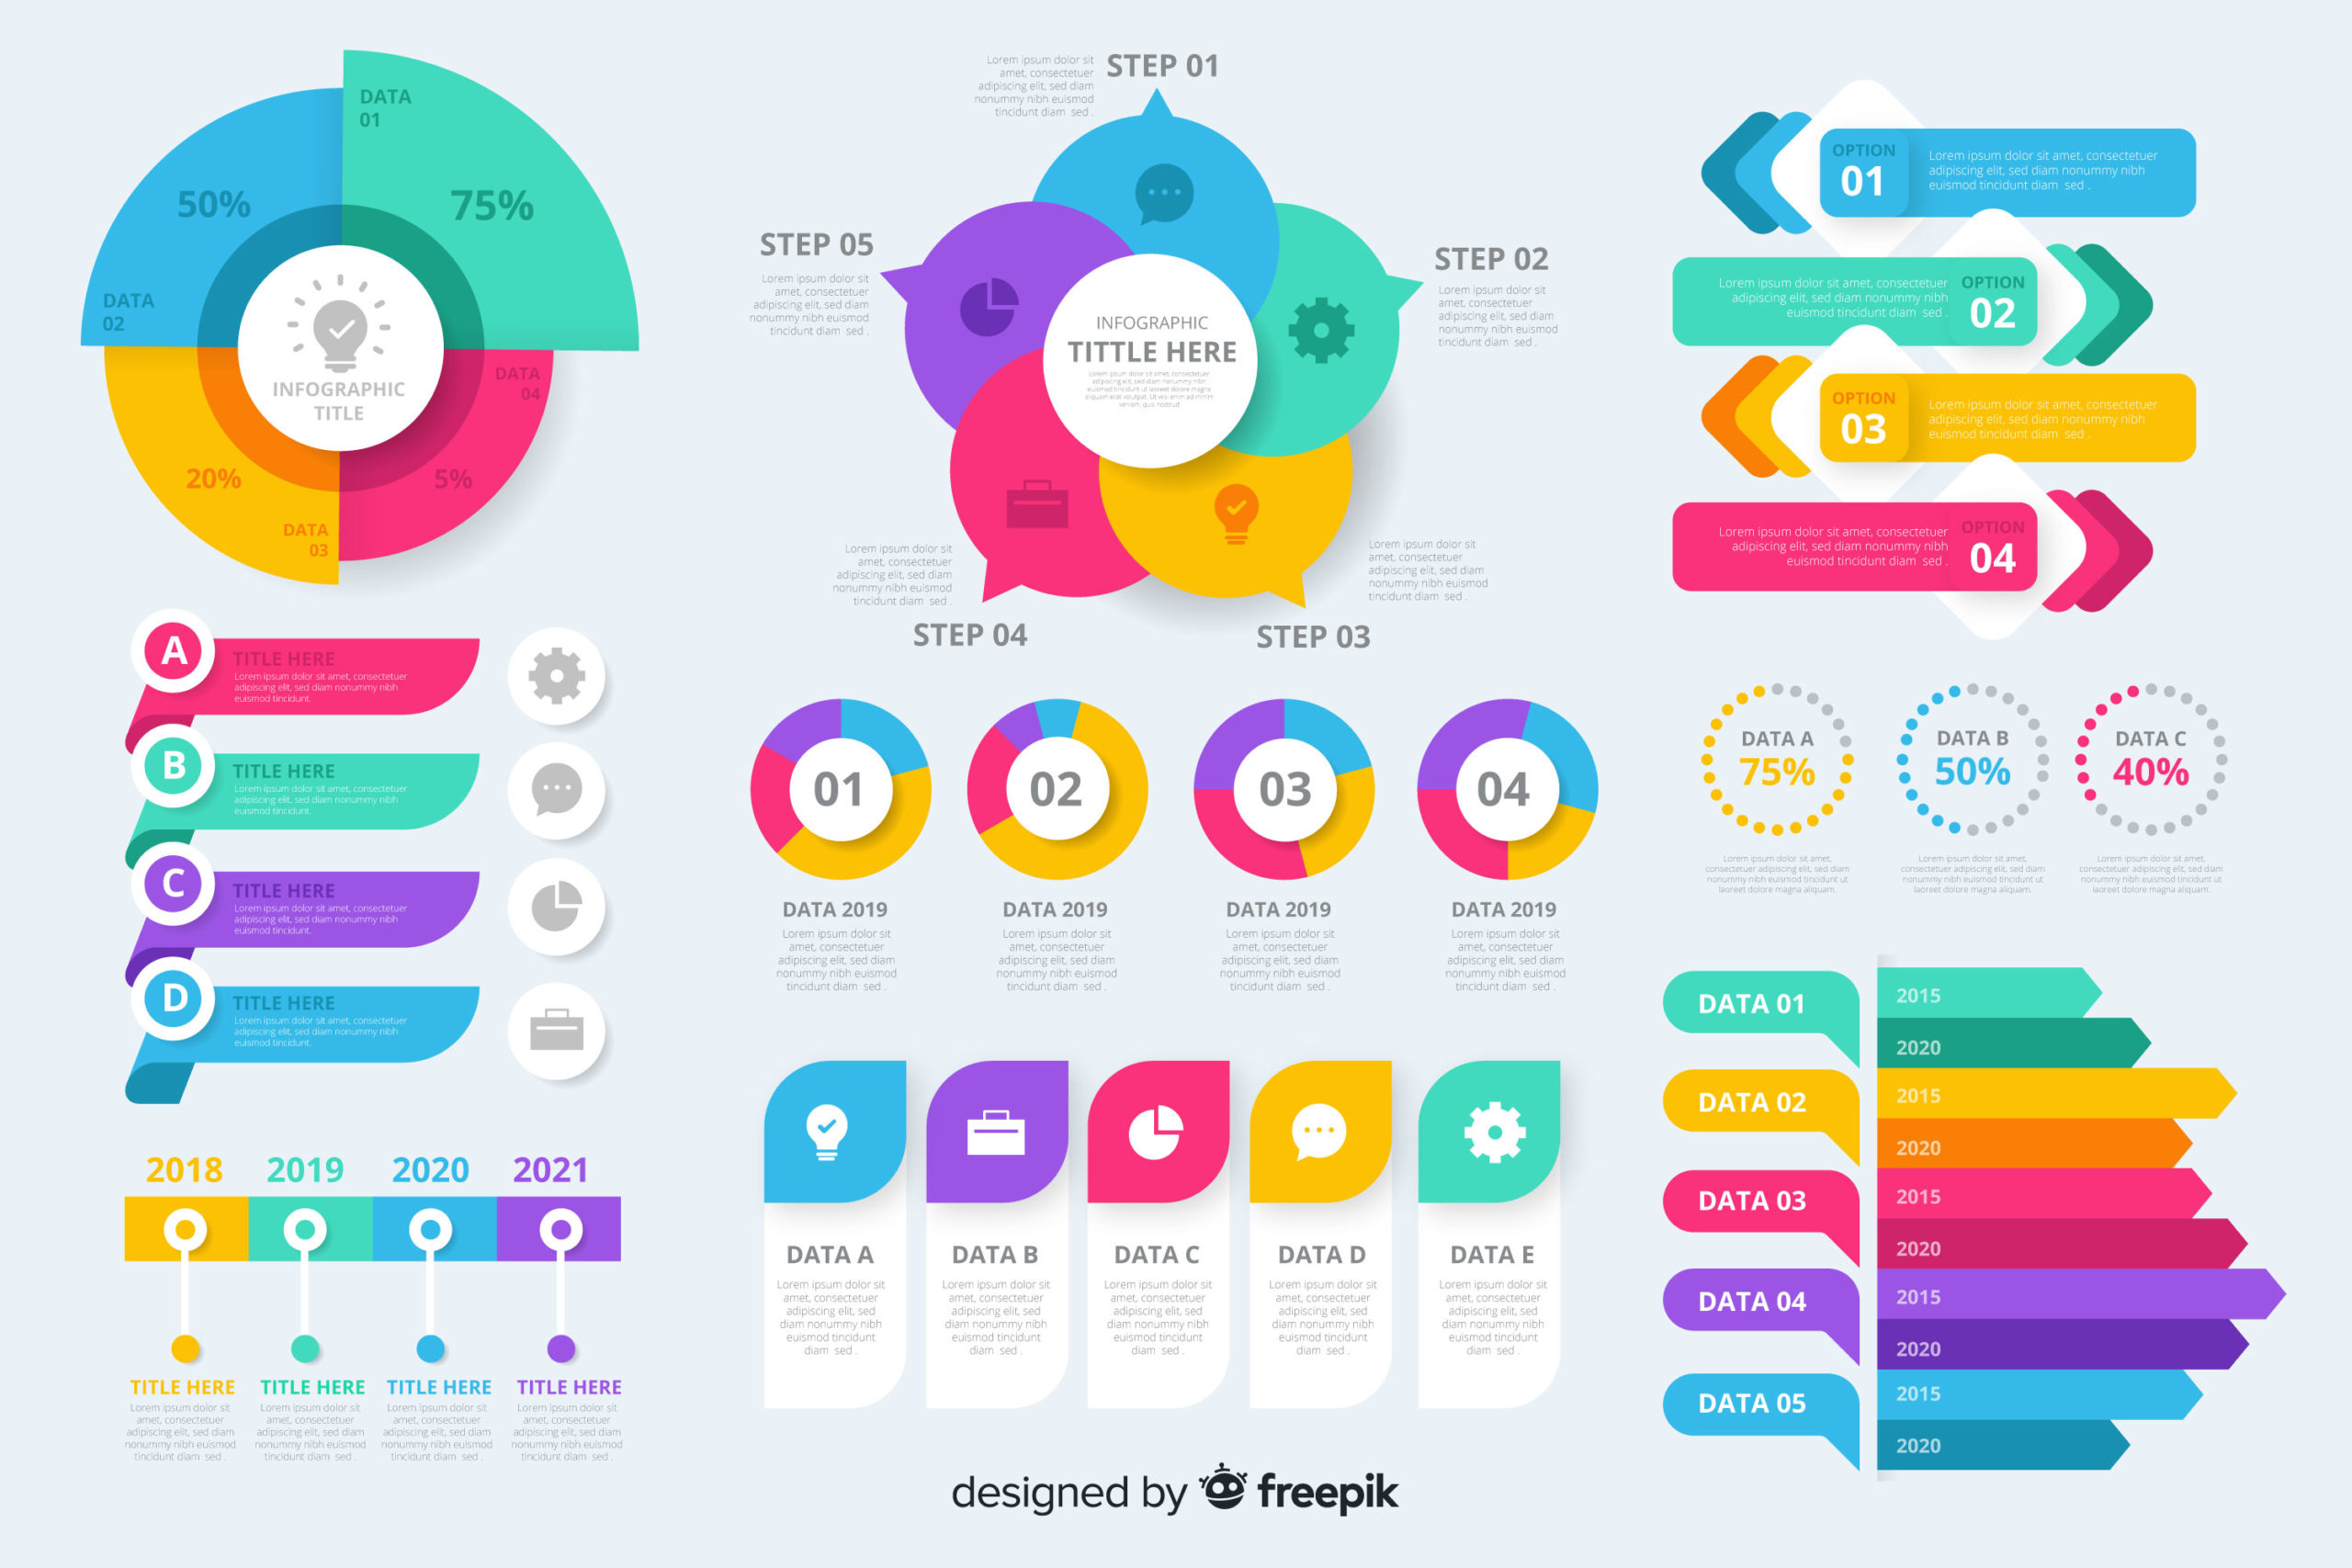 Animated Infographics Overview and Examples - Atomi Systems, Inc.